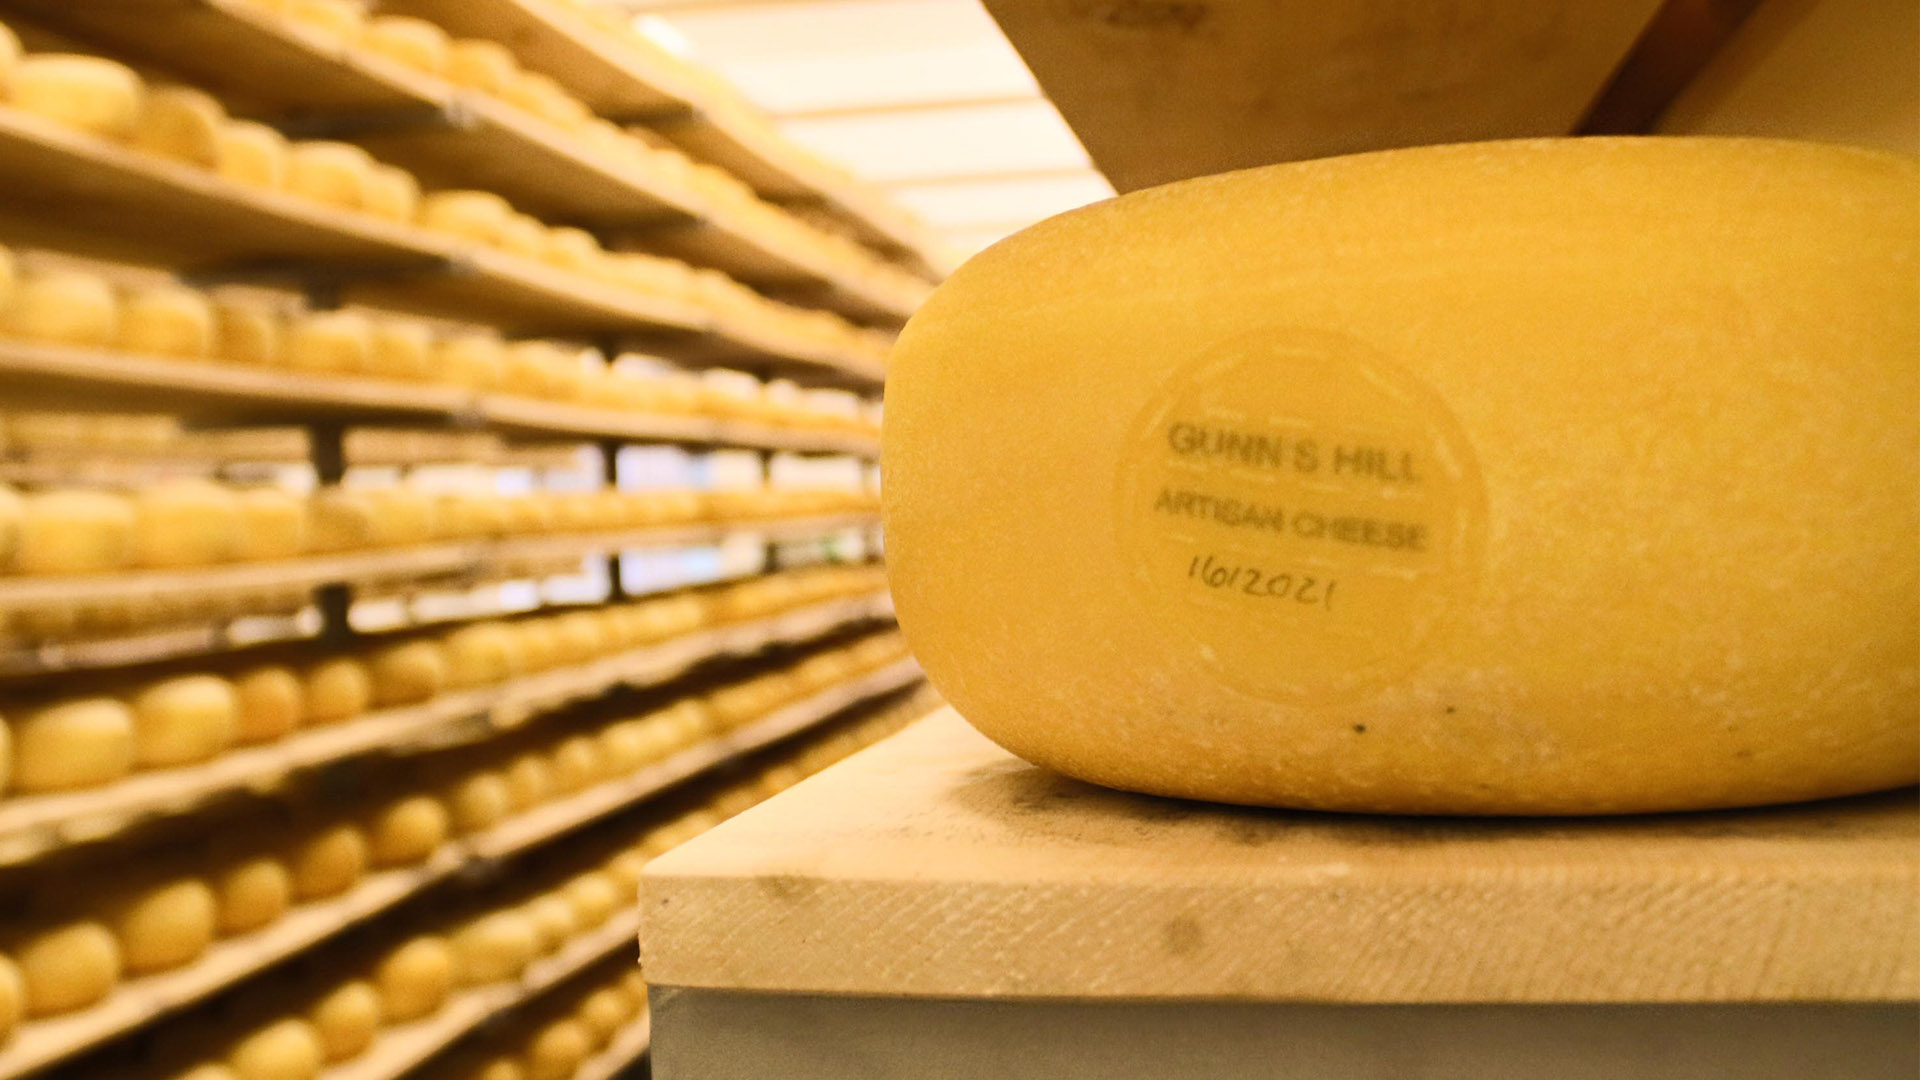 A close up of a large wheel of aging cheese on a shelf next to other large wheels of aging cheese with a stamp on it that reads 